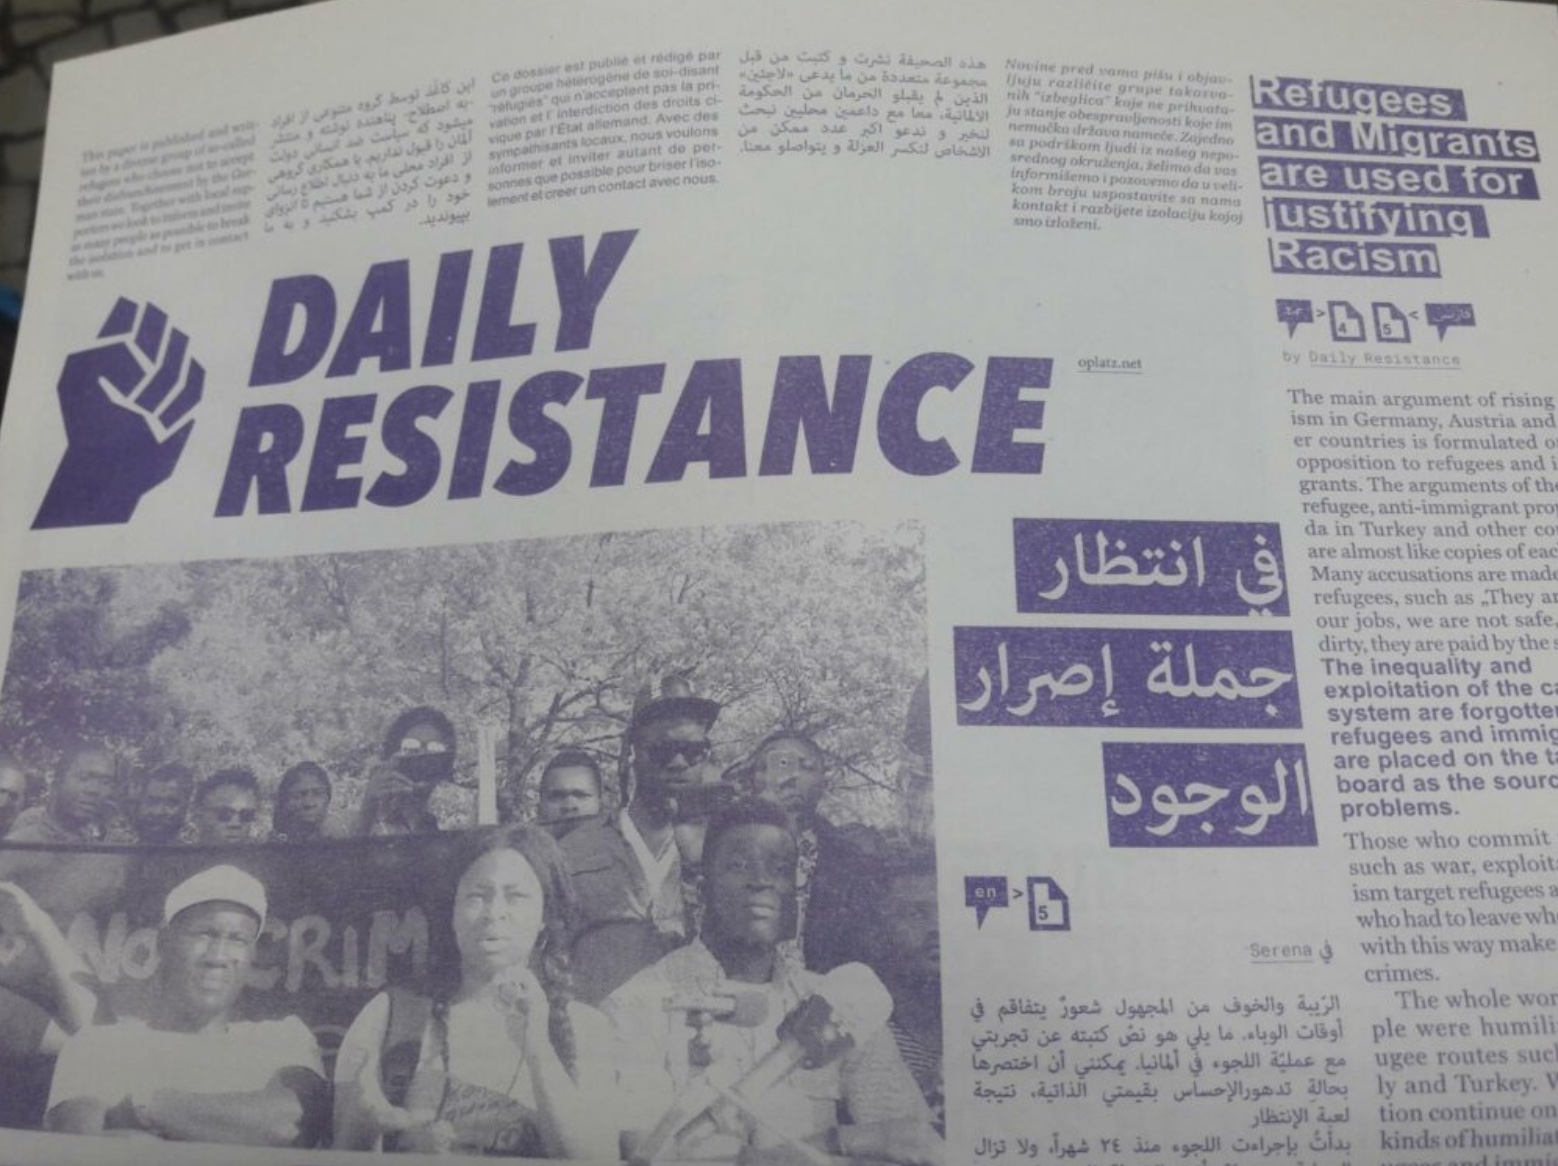 Daily Resistance #9 is out!